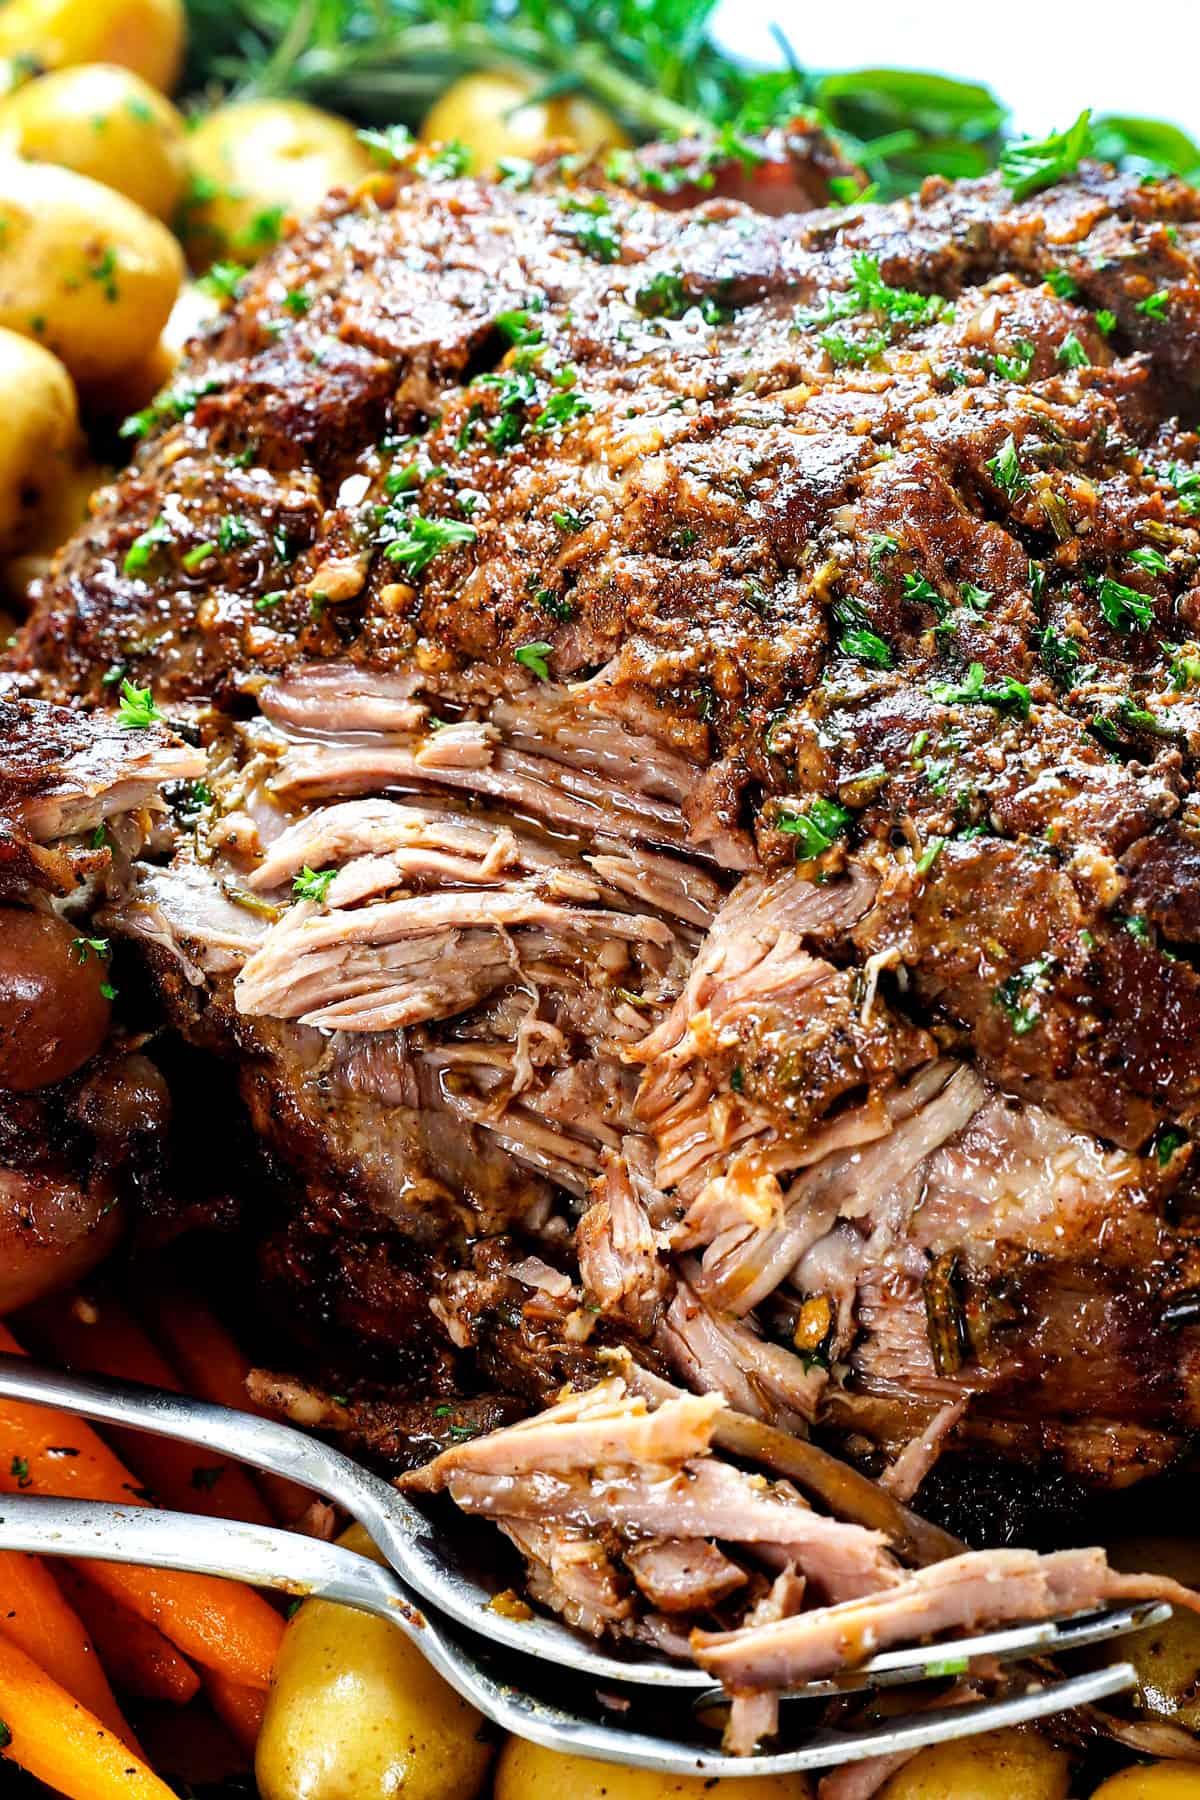 up close of leg of lamb recipe showing how tender and juicy it is